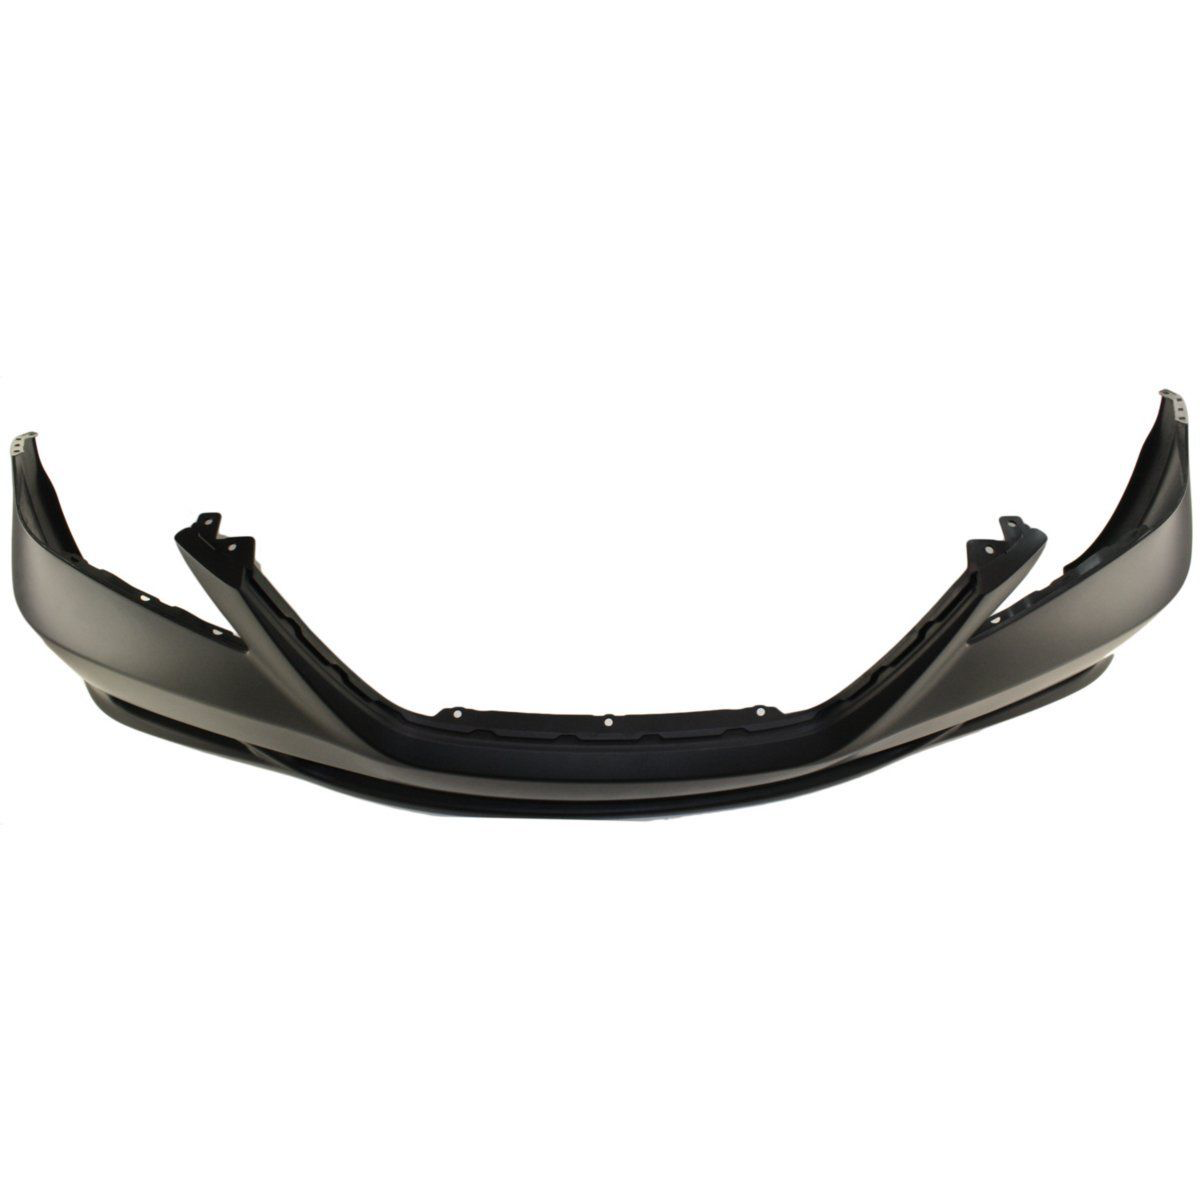 2005-2007 HONDA ODYSSEY Front Bumper Cover LX/EX Painted to Match